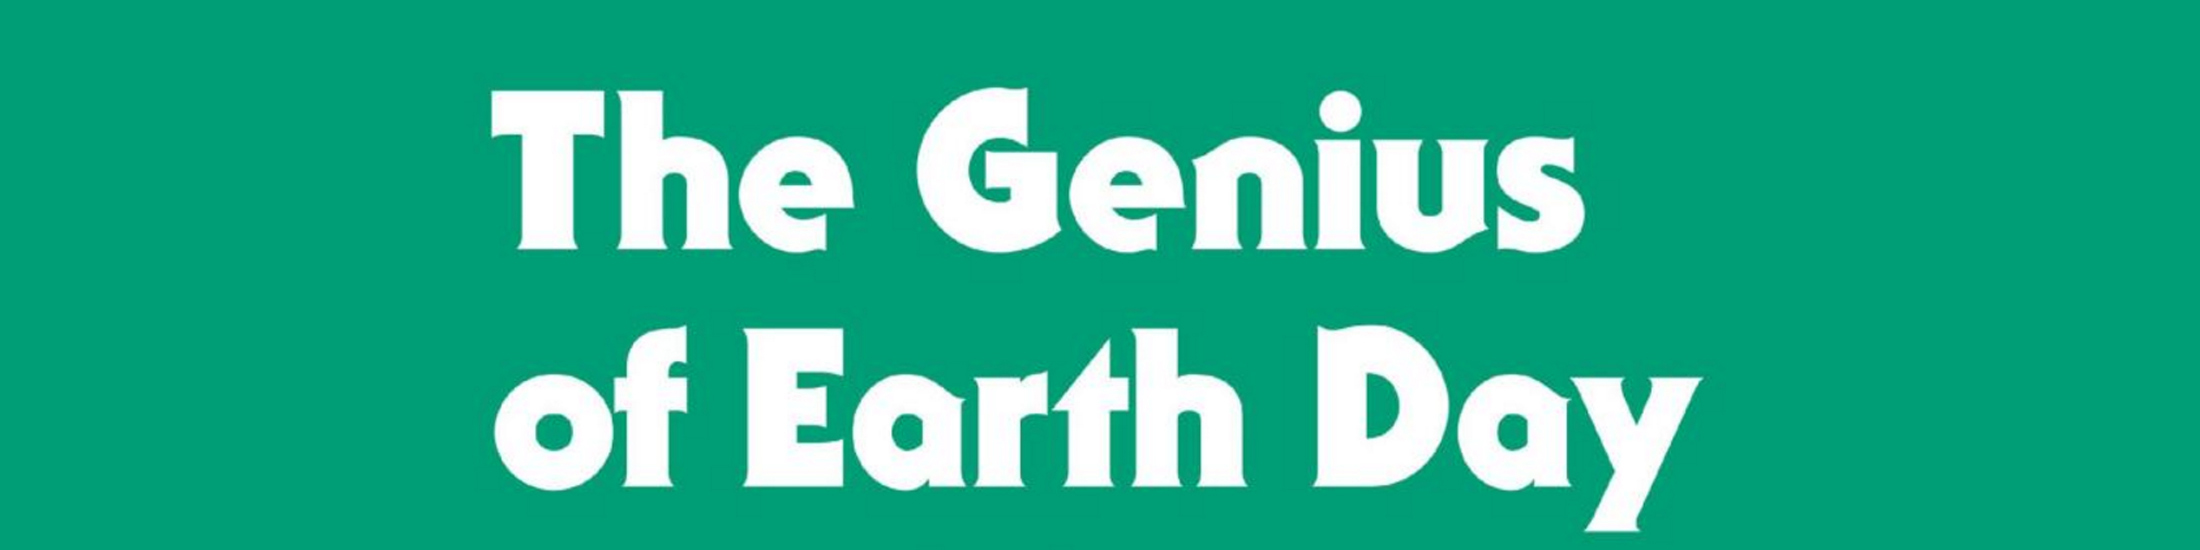 "The Genius of Earth Day" by Adam Rome